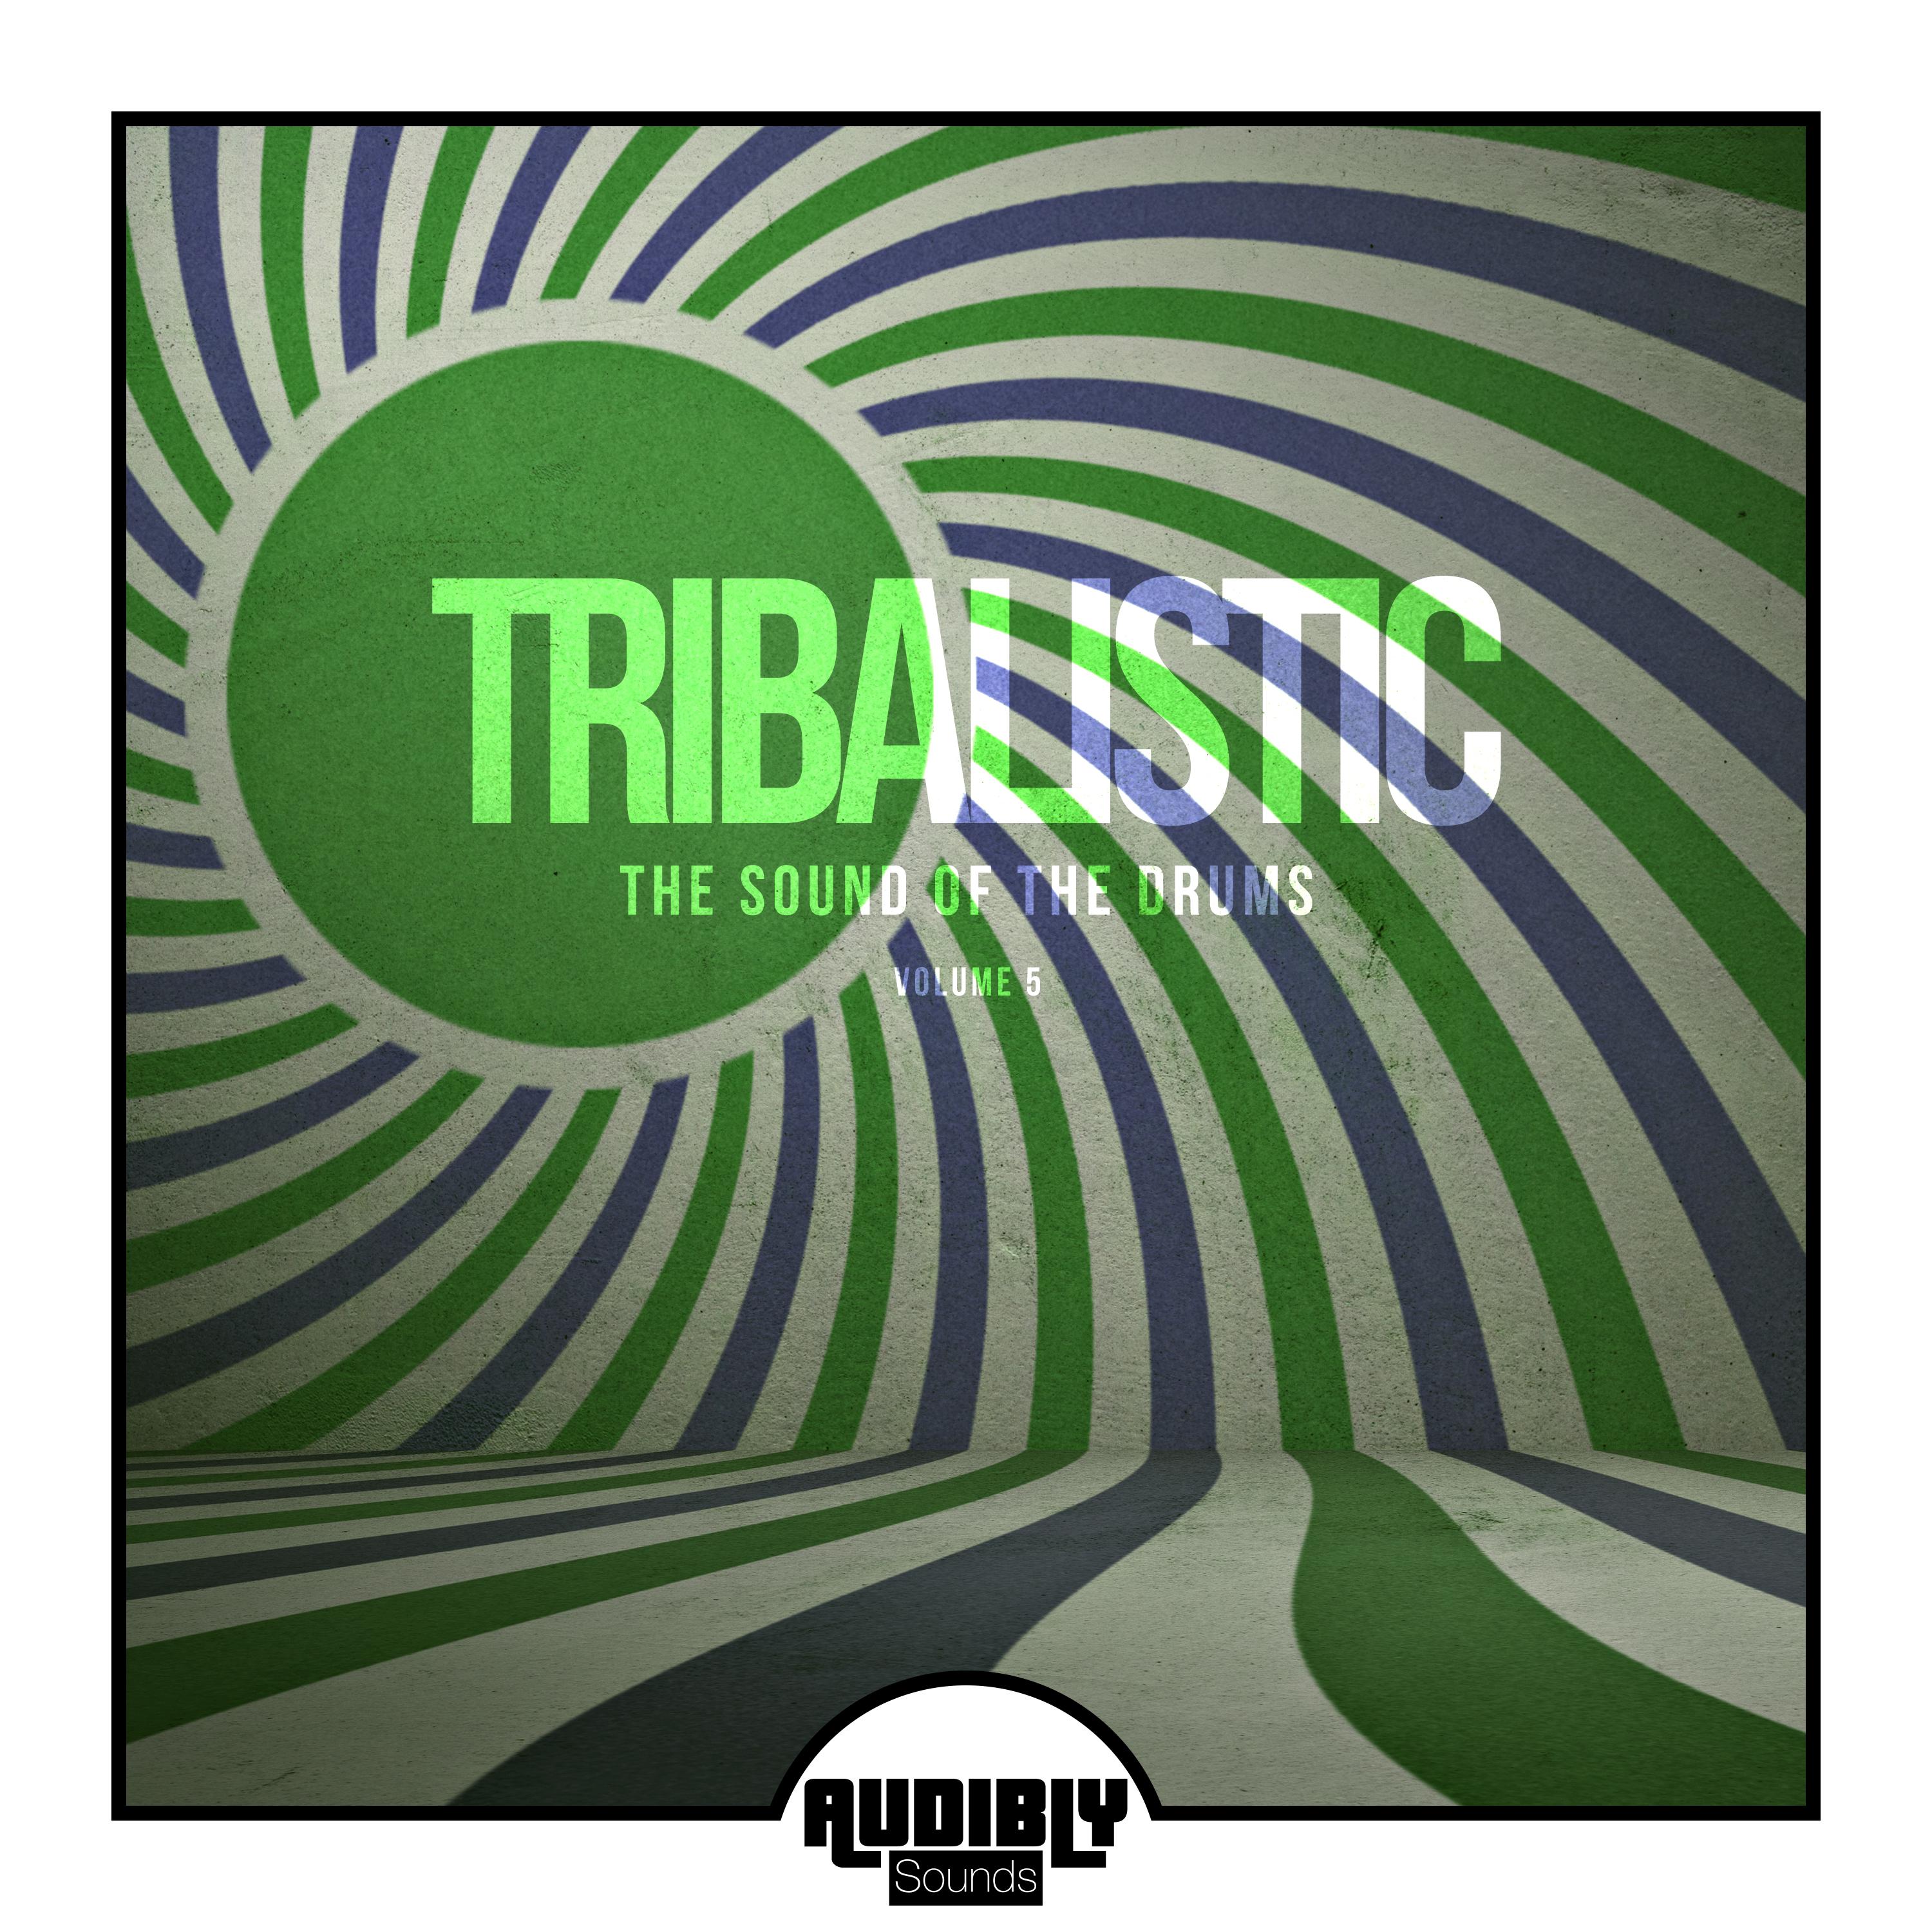 Tribalistic, Vol. 5 (The Sound of the Drums)